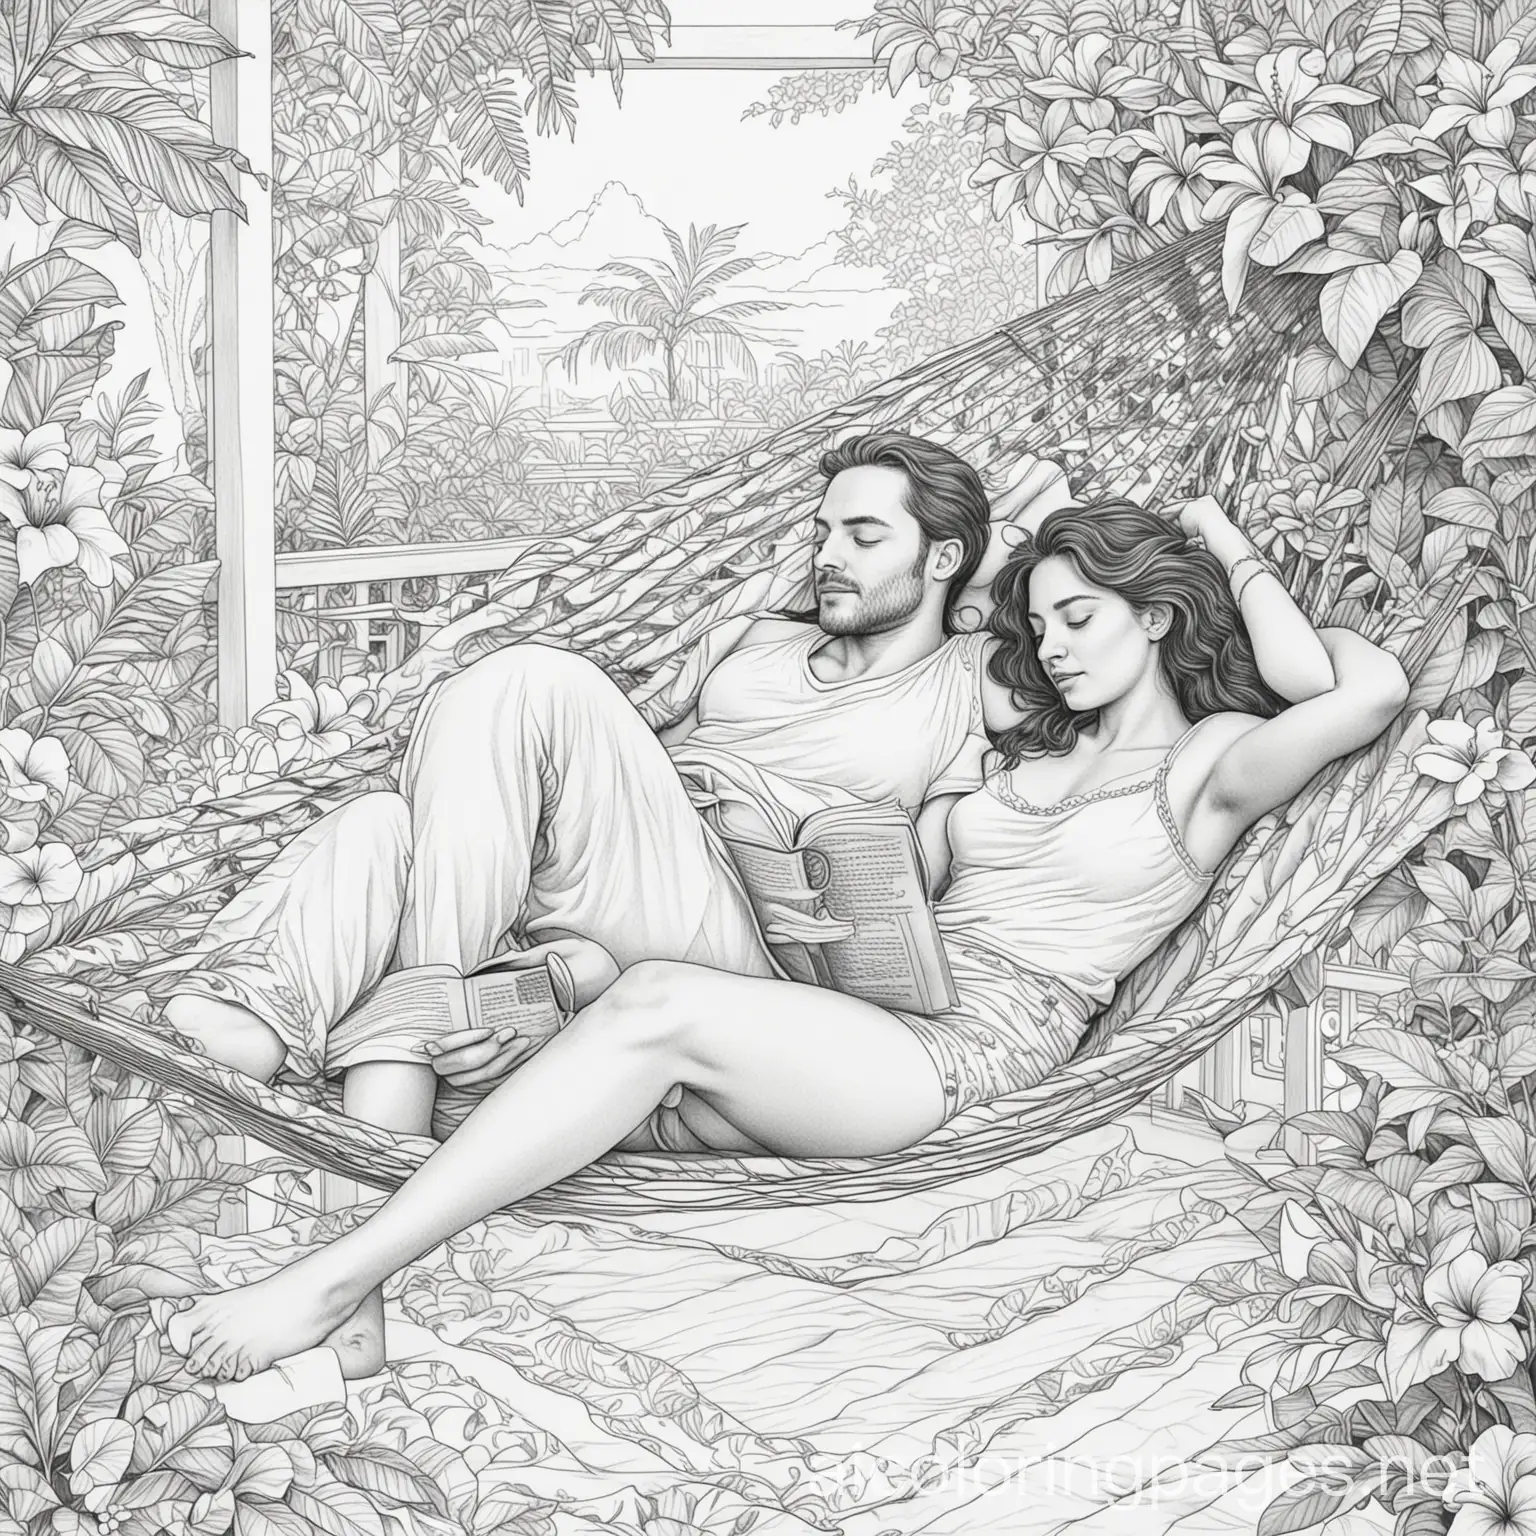 Couple-Relaxing-in-Hammock-Surrounded-by-Plants-and-Flowers-Coloring-Page